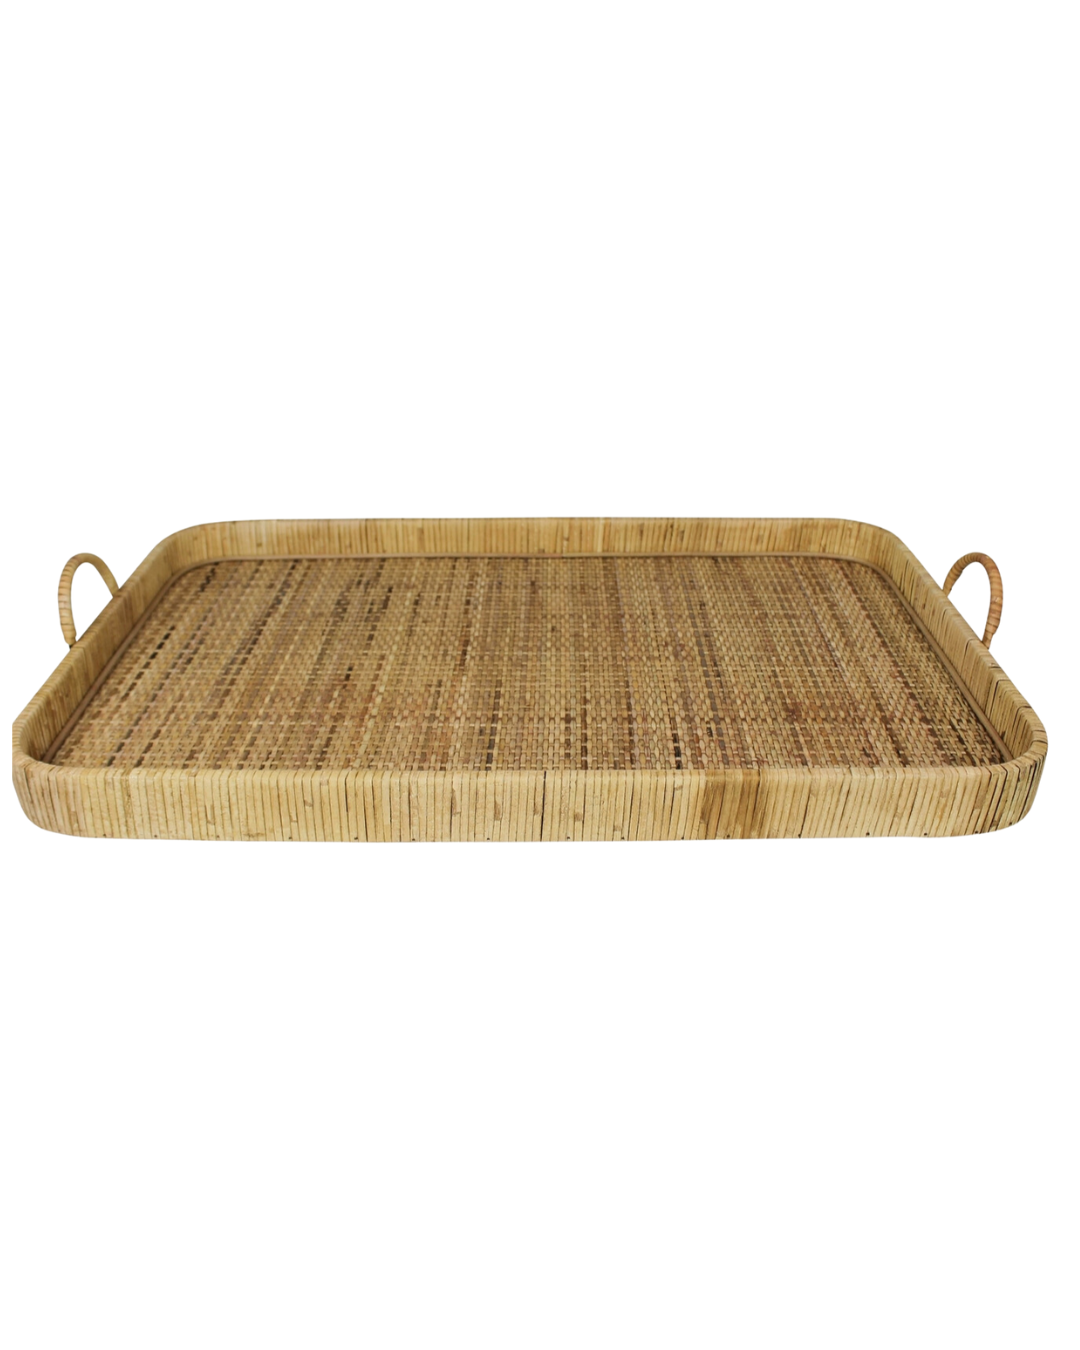 A rectangular woven rattan serving tray with built-in handles on each shorter side, displayed against a white background, perfect for a HomArt Cayman Grand Rattan Tray in a Scottsdale Arizona bungalow.